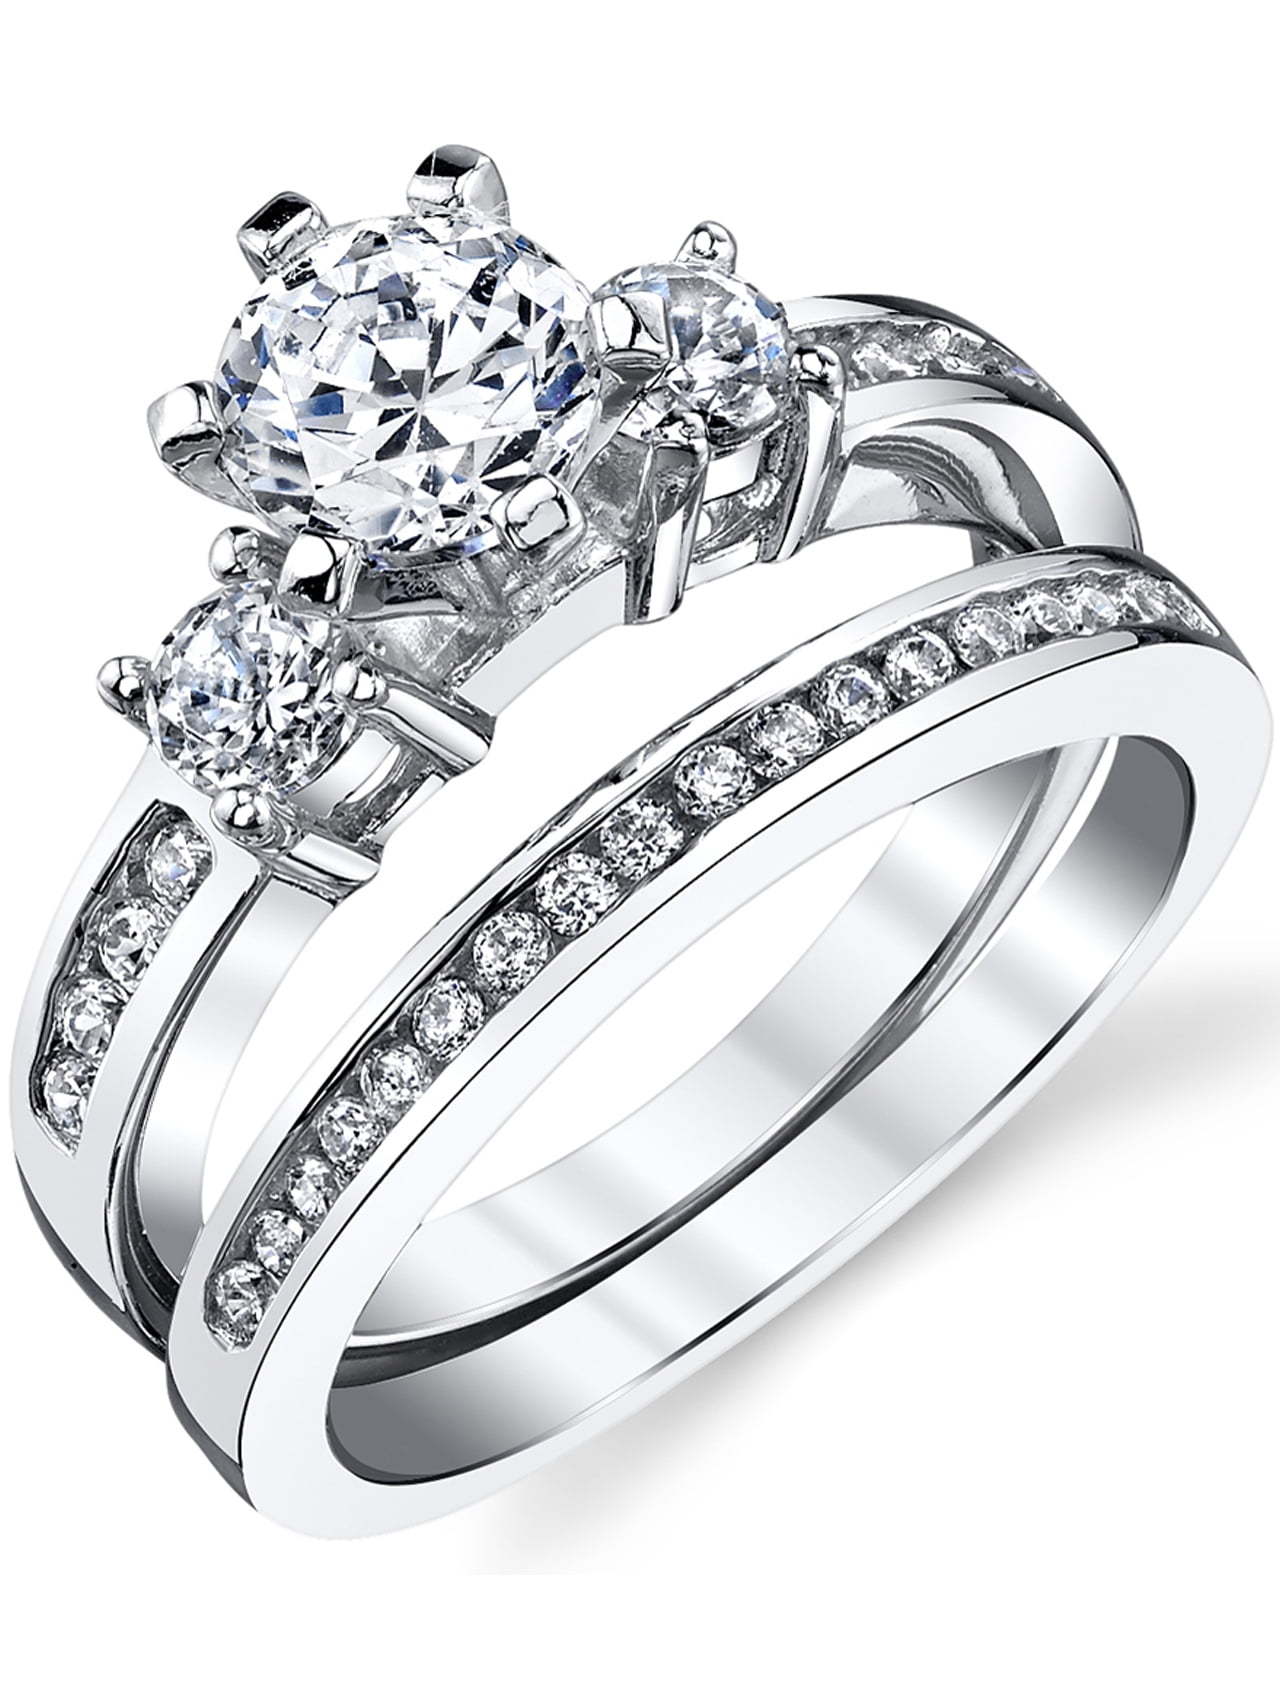 Women's Sterling Silver Wedding Engagement Ring 1.15Ct TCW 2Pc Set